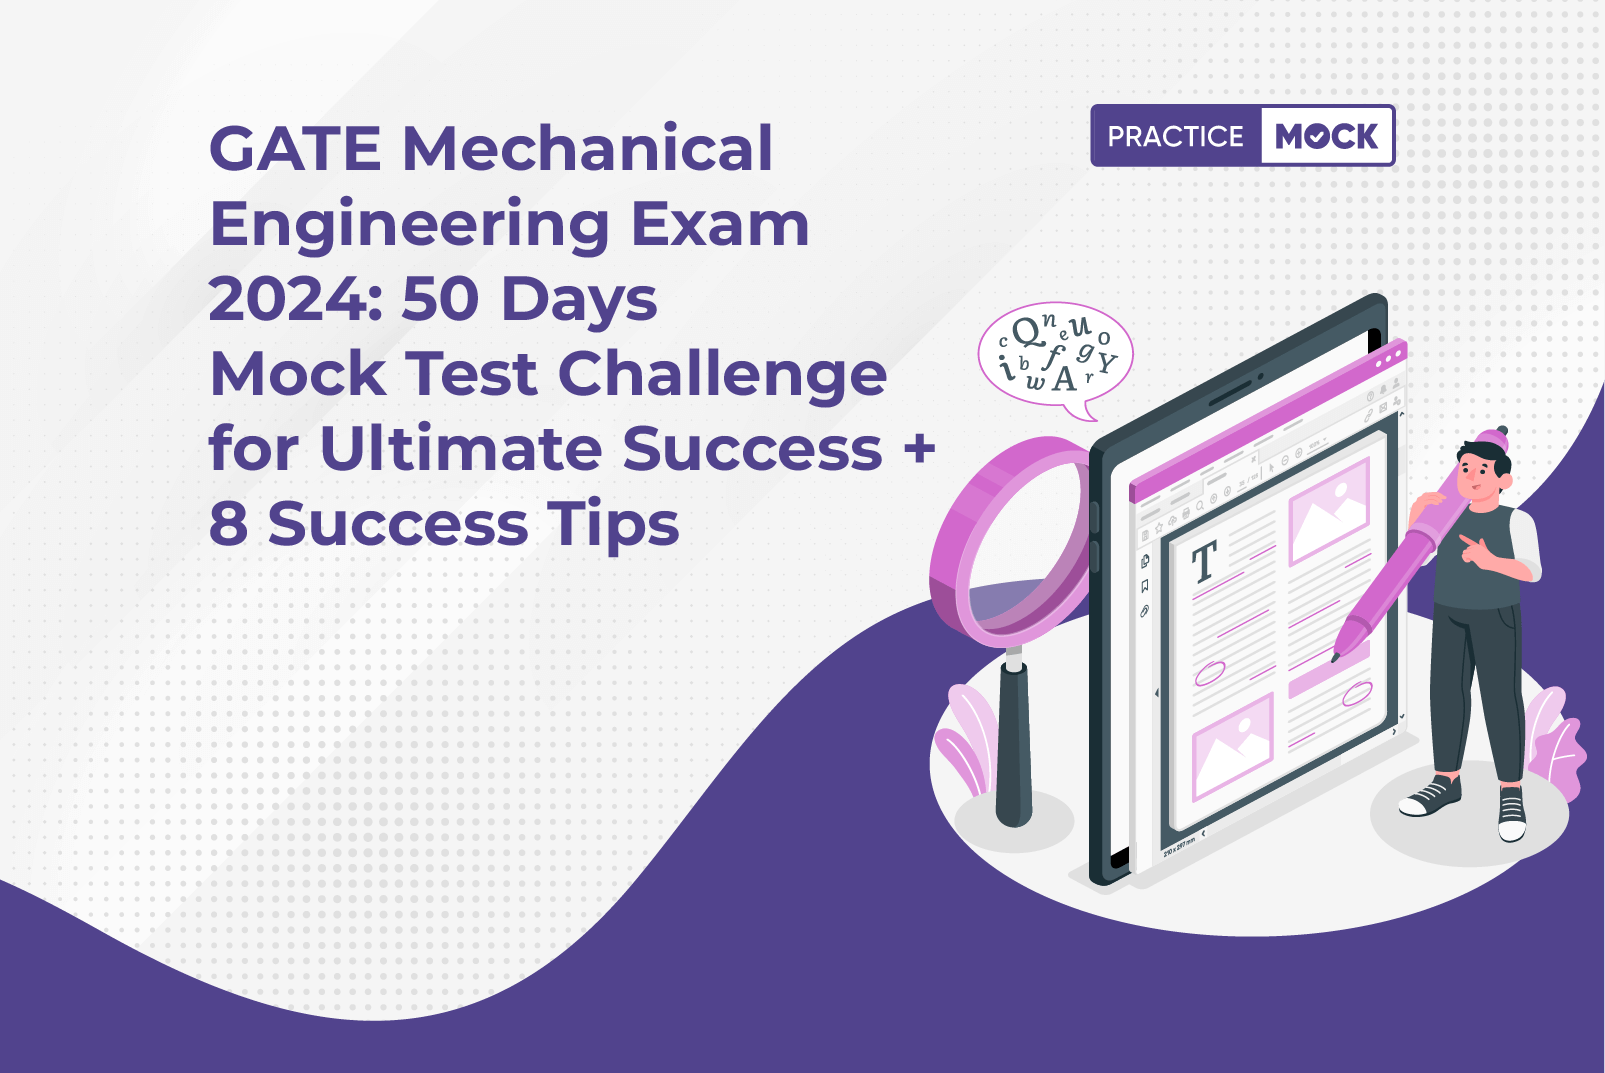 GATE Mechanical Engineering Exam 2024: 50 Days Mock Test Challenge for Ultimate Success + 8 Success Tips